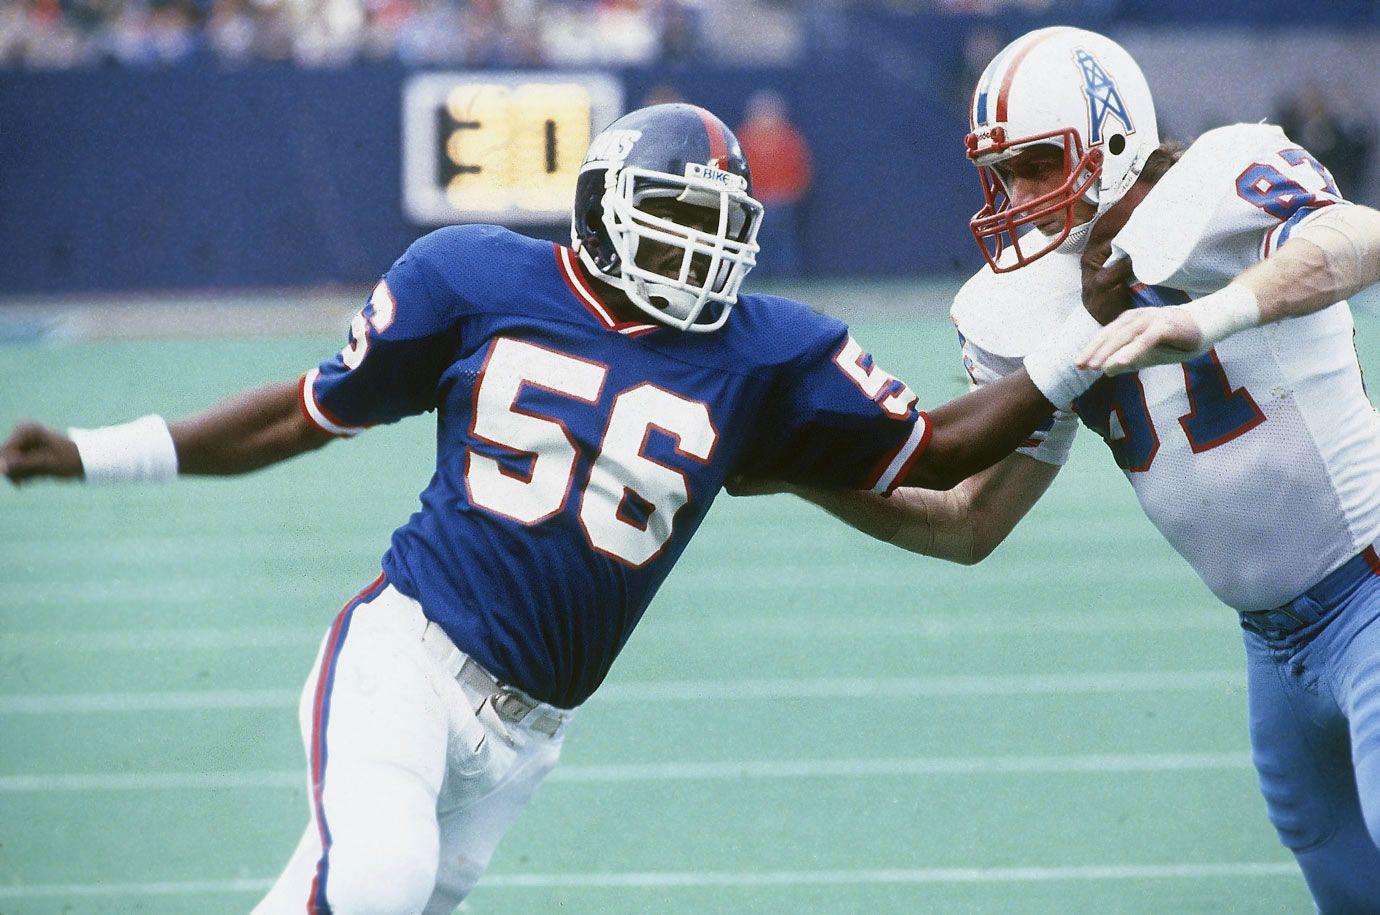 Classic SI Photo of Lawrence Taylor